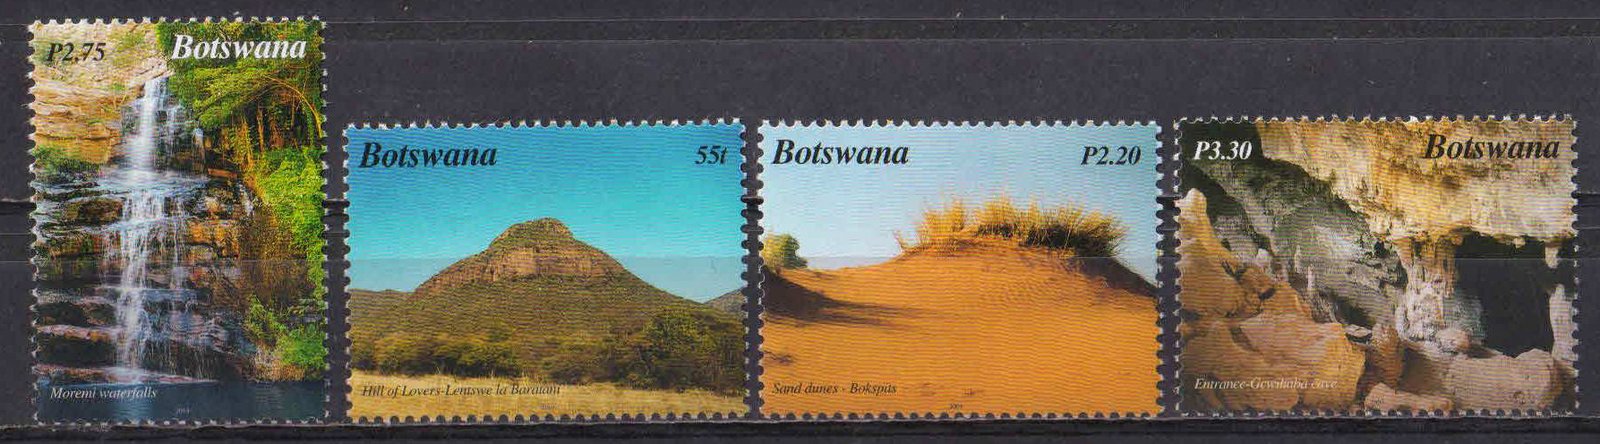 BOTSWANA 2003-Natural Places, Hills, Sand Dunes, Waterfall, Cave, Set of 4, MNH, S.G. 1000-1003-Cat £ 6-